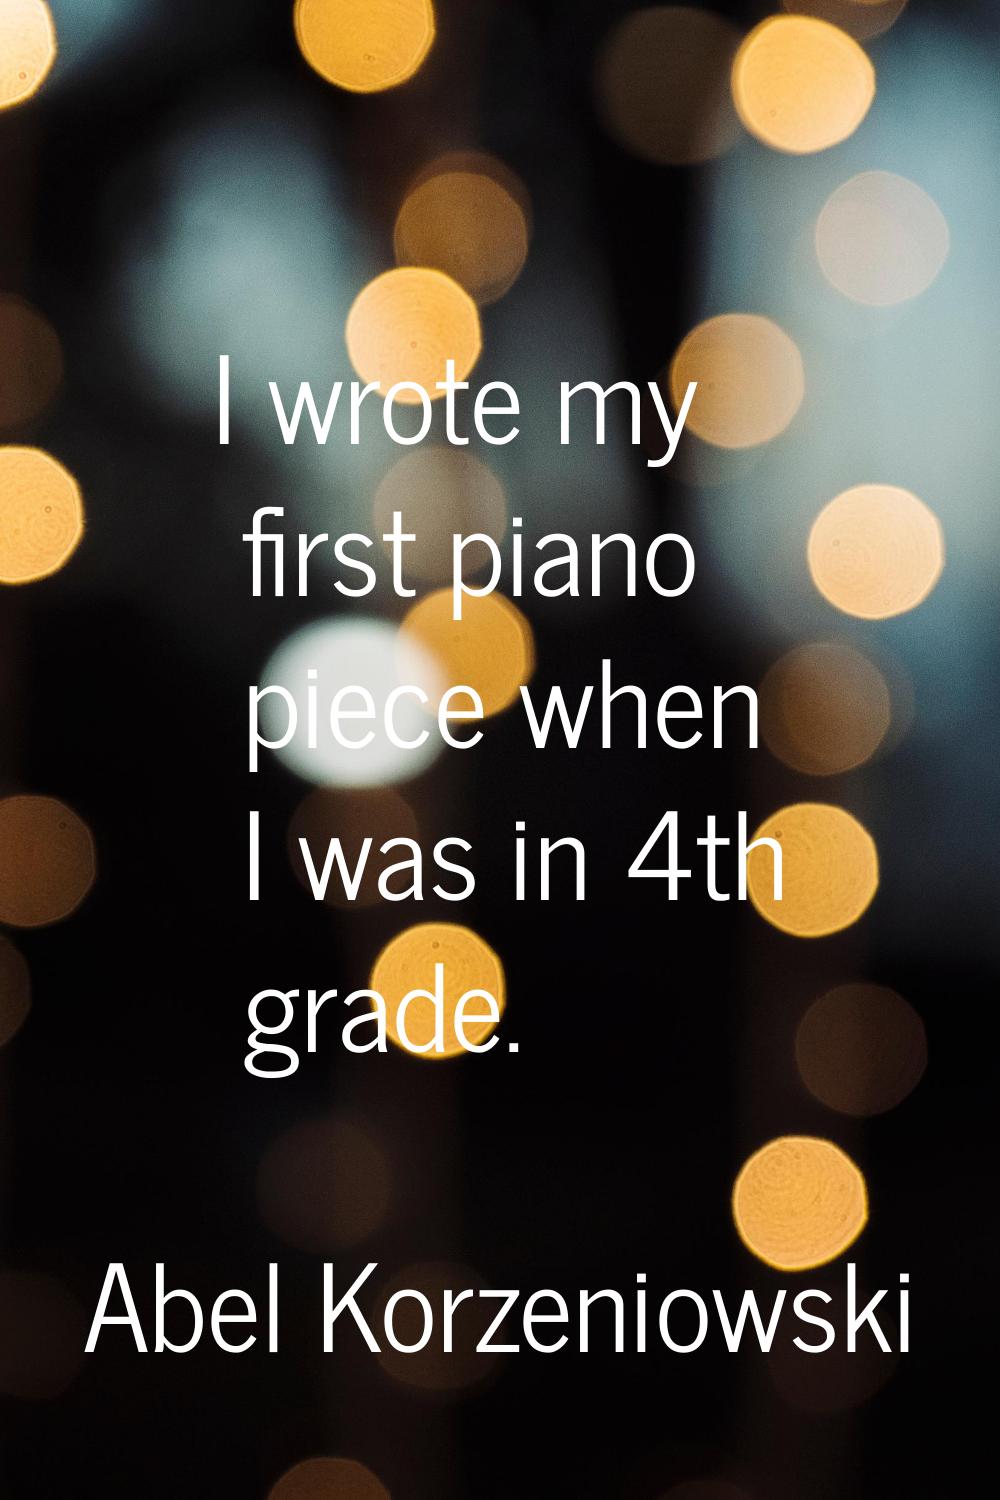 I wrote my first piano piece when I was in 4th grade.